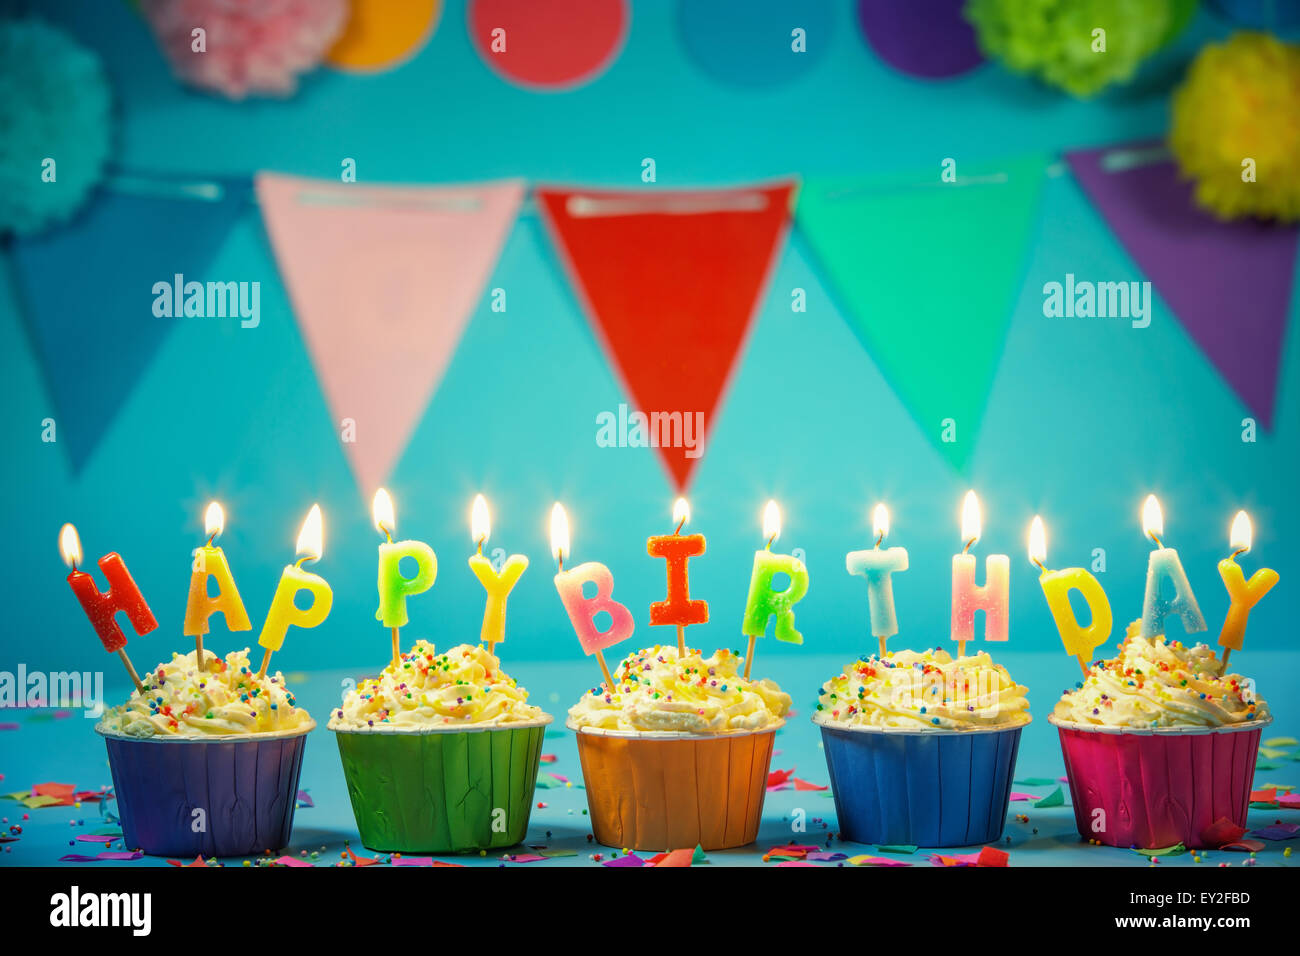 Tasty birthday cupcake with candles Stock Photo